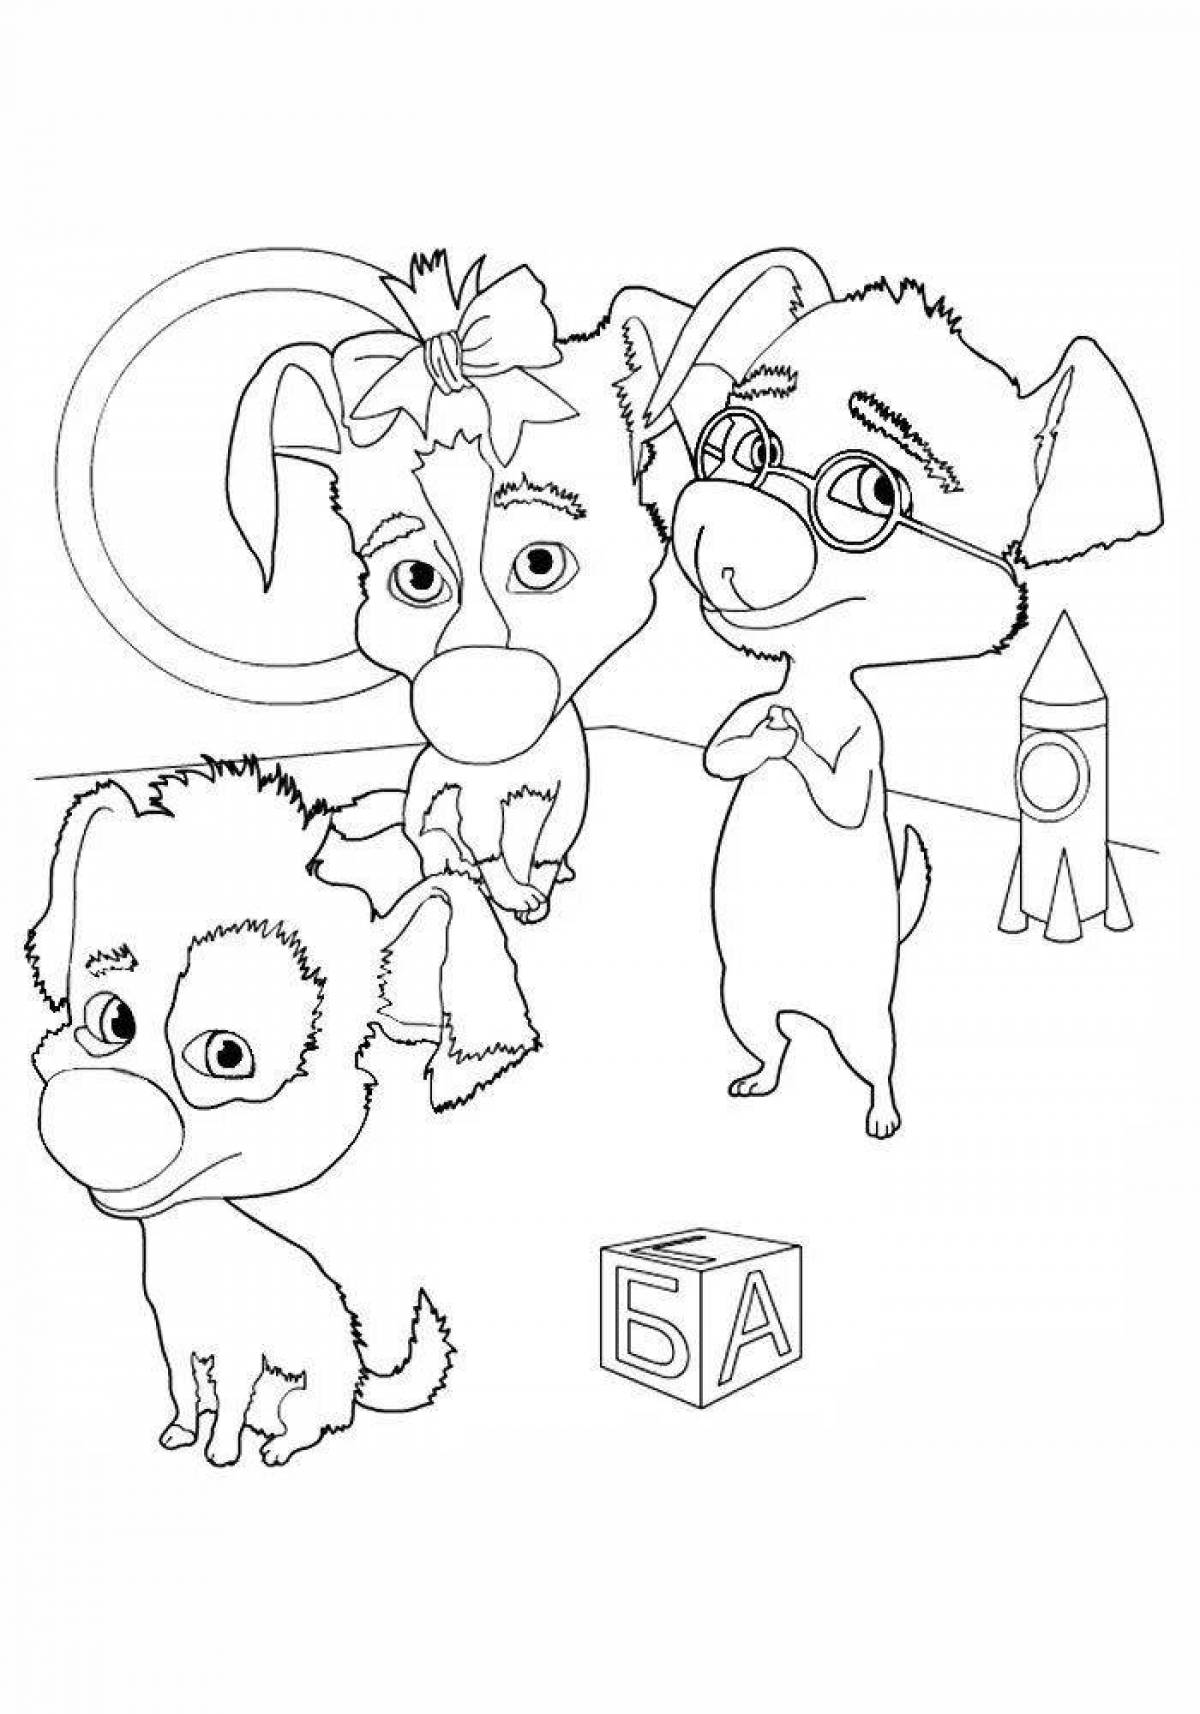 Jocular squirrel and arrow naughty family coloring page